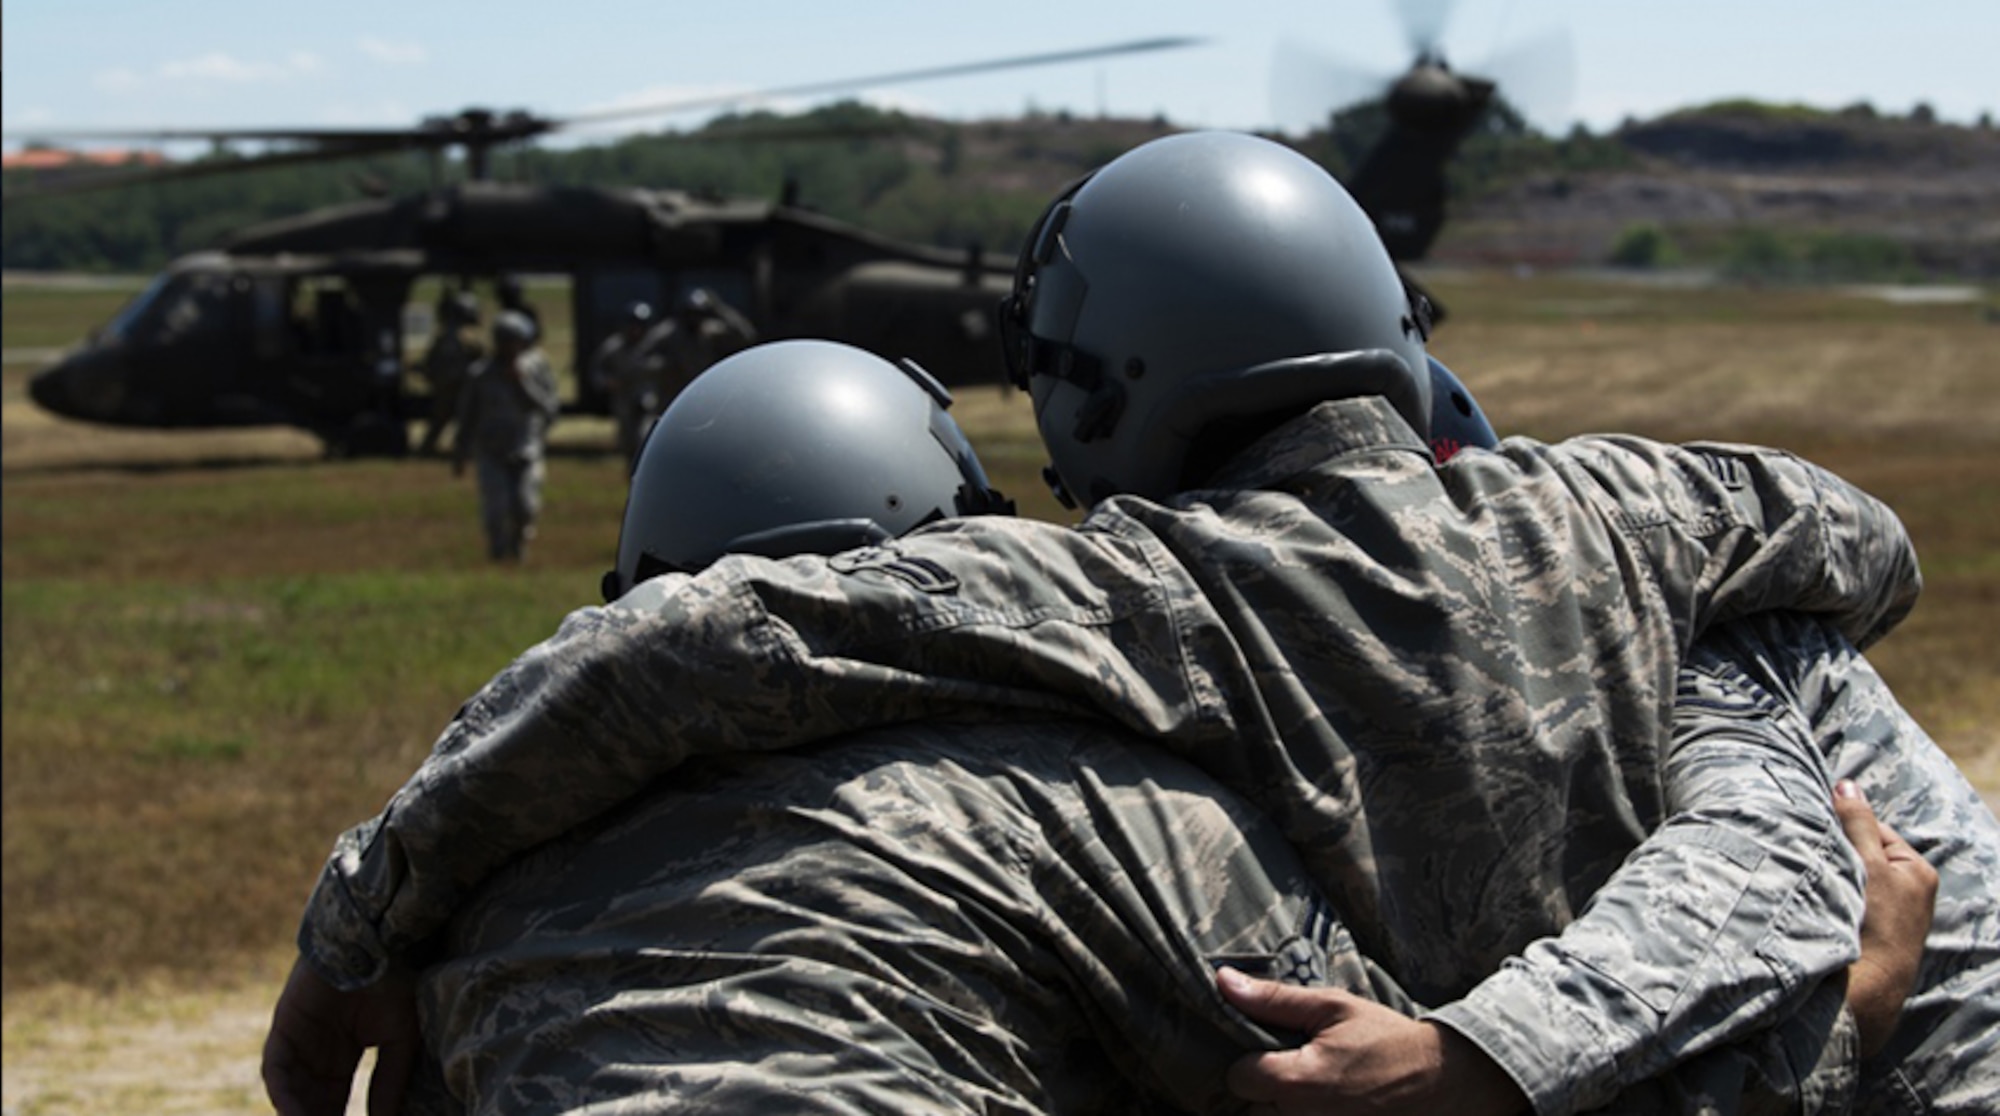 8th Fighter Wing Airmen help a simulated casualty move toward a UH-60 Blackhawk helicopter from U.S. Army Garrison Humphreys during personnel recovery training Aug. 15, 2018, at Kunsan Air Base, Republic of Korea. In this exercise, it is likely each participant would have used the Personnel Recovery Command and Control software system to upload their vital statistics prior to deployment. Program Executive Office Digital at Hanscom Air Force Base, Mass., supports and sustains that system using agile software development processes. (U.S. Air Force photo by Senior Airman Stefan Alvarez)